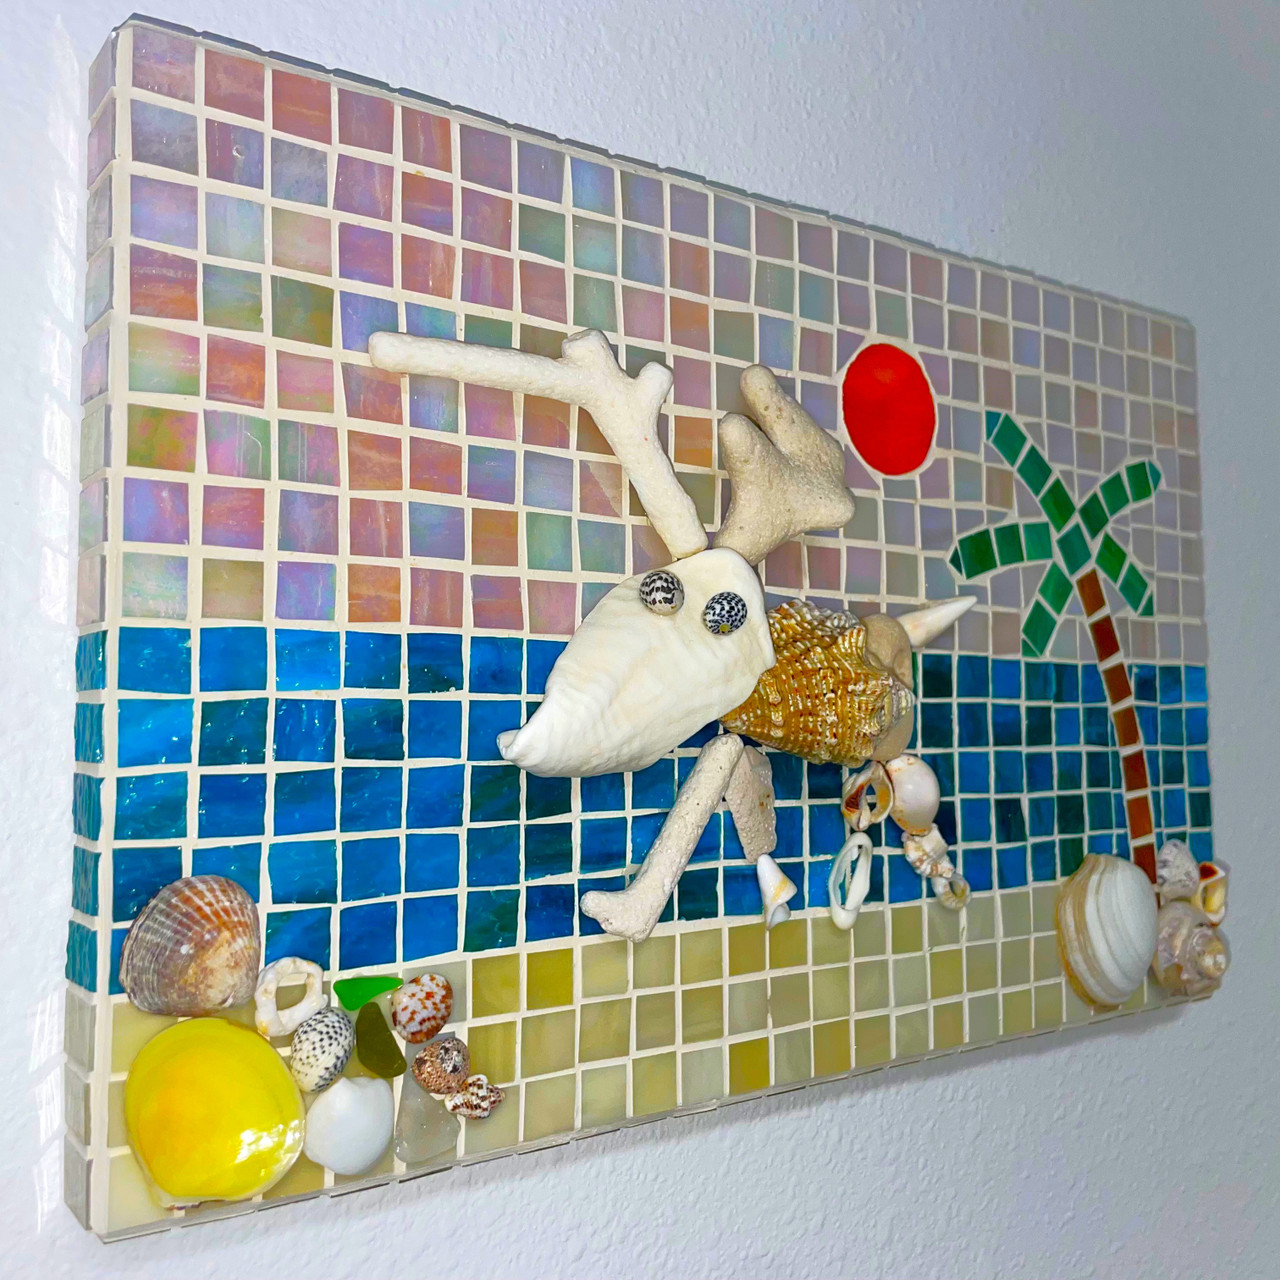 Mosaic Kit for Adults, Diy Mosaic Kit, Complete Mosaic Kit Includes Shaped  Glass Pieces, Ceramic Tiles, Glue Tools Grout and Instructions 